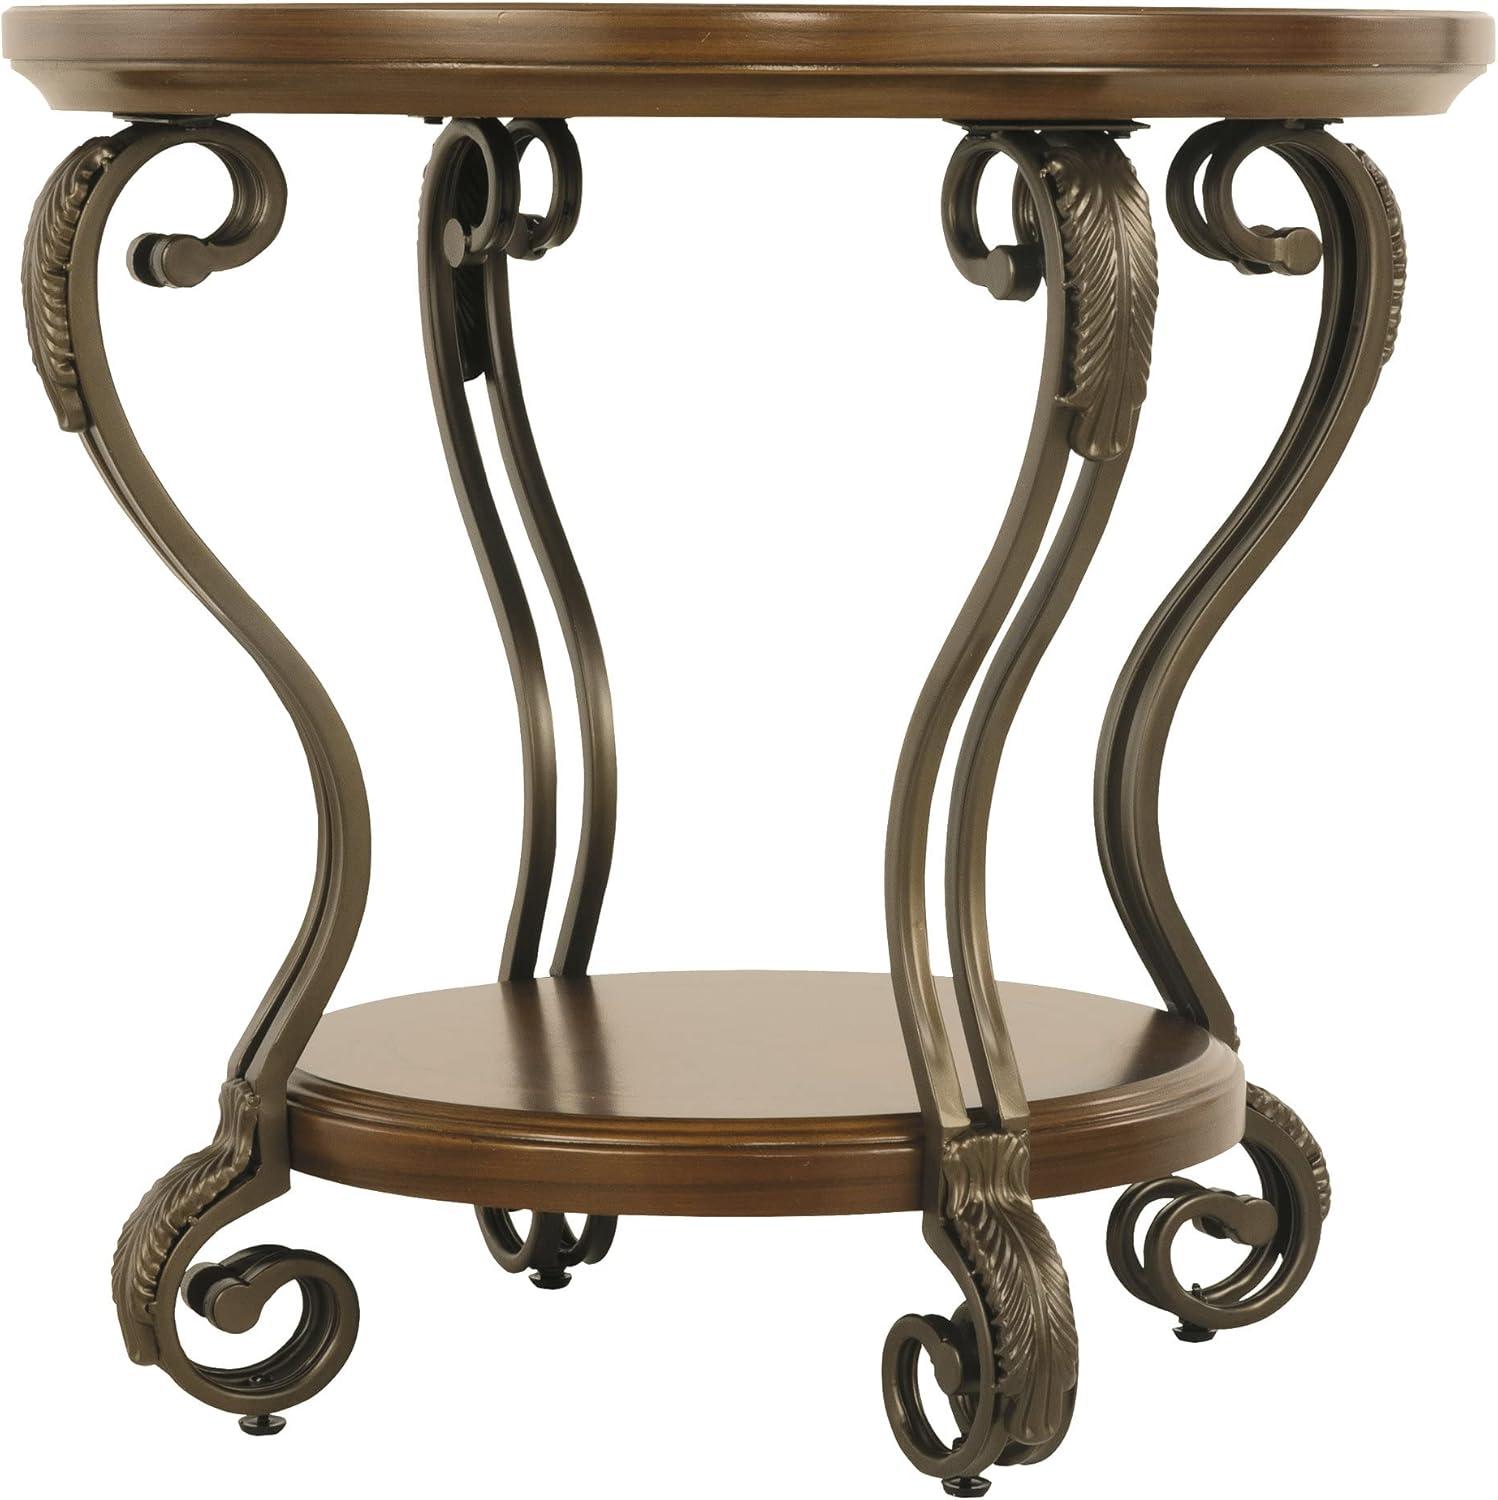 Nestor Contemporary Round End Table with Acanthus Leaf Carvings, Medium Brown